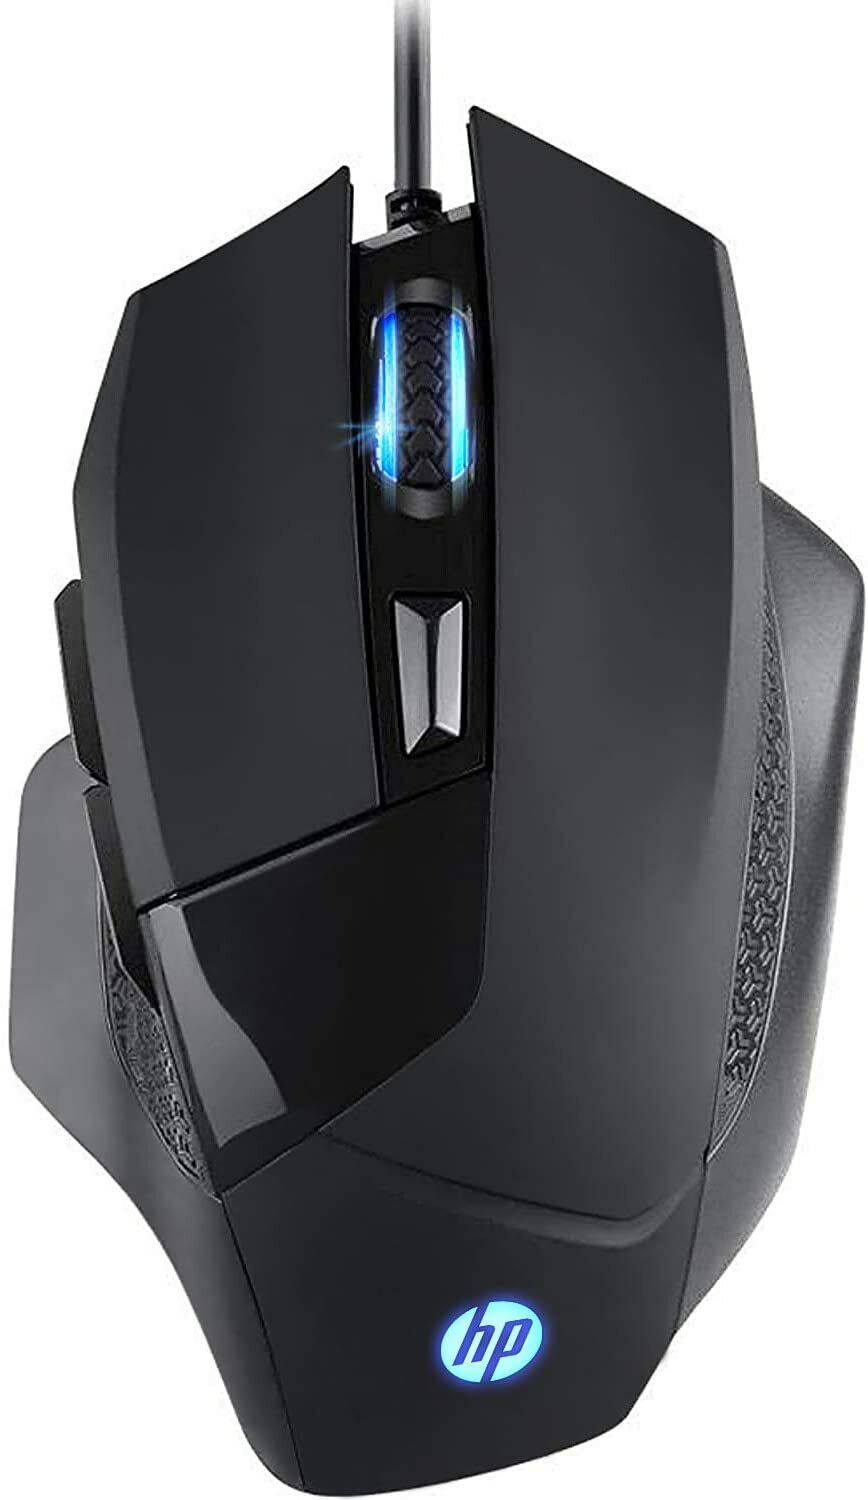 HP USB Gaming Mouse for E-Sports Gaming Adjustable DPI, Wired Backlit G200 Mouse